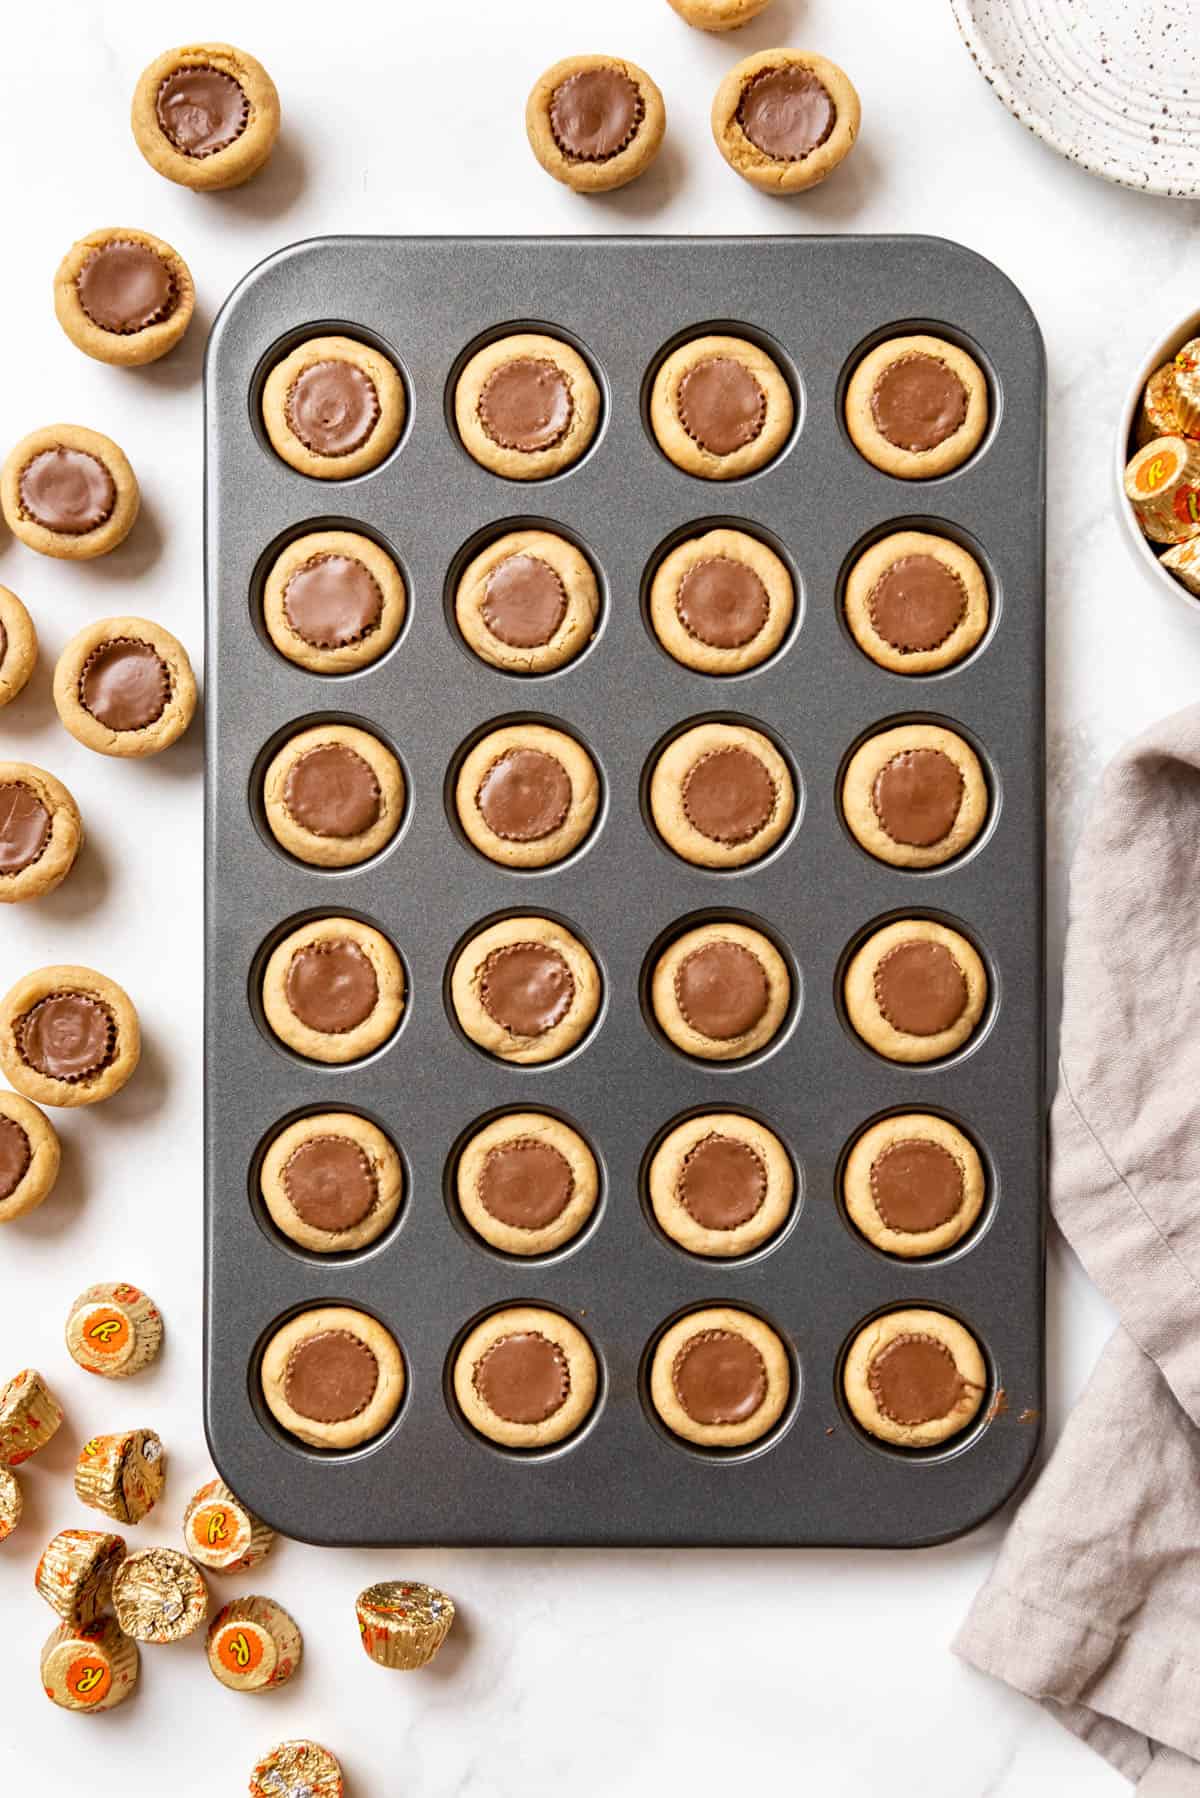 An overhead image of peanut butter cup cookies in a mini muffin pan with more cookies and miniature peanut butter cups scattered around it.